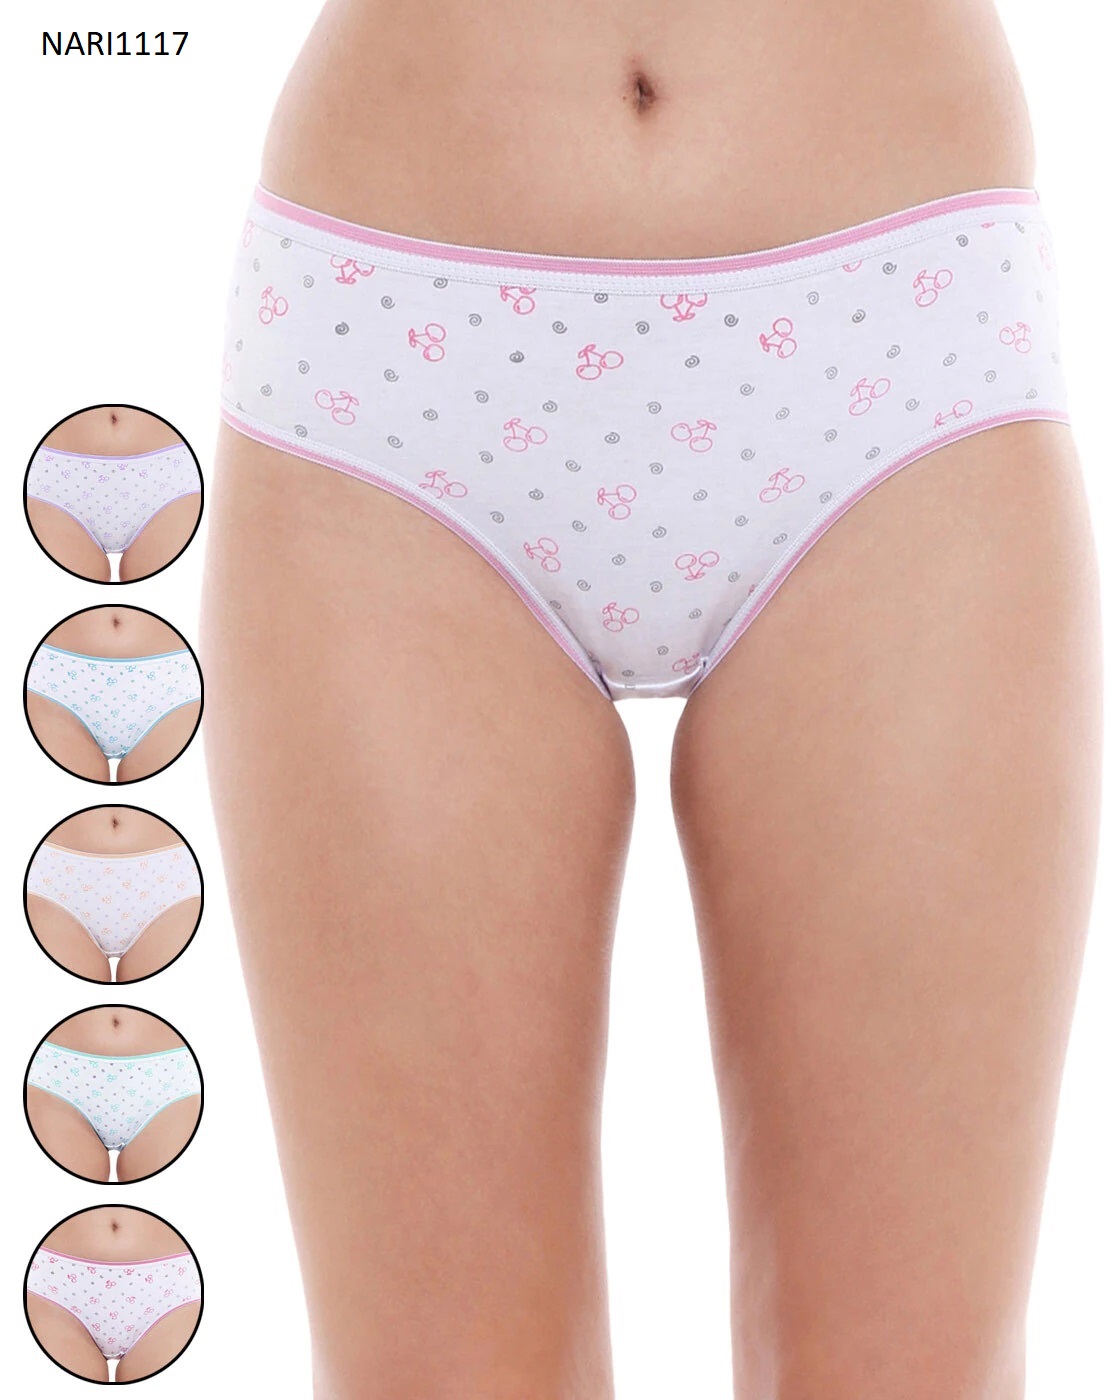 Buy ESSA 100% Hosiery Cotton Printed Women Panties Set of 10 - (32 Inches  or 80 centimetres) at